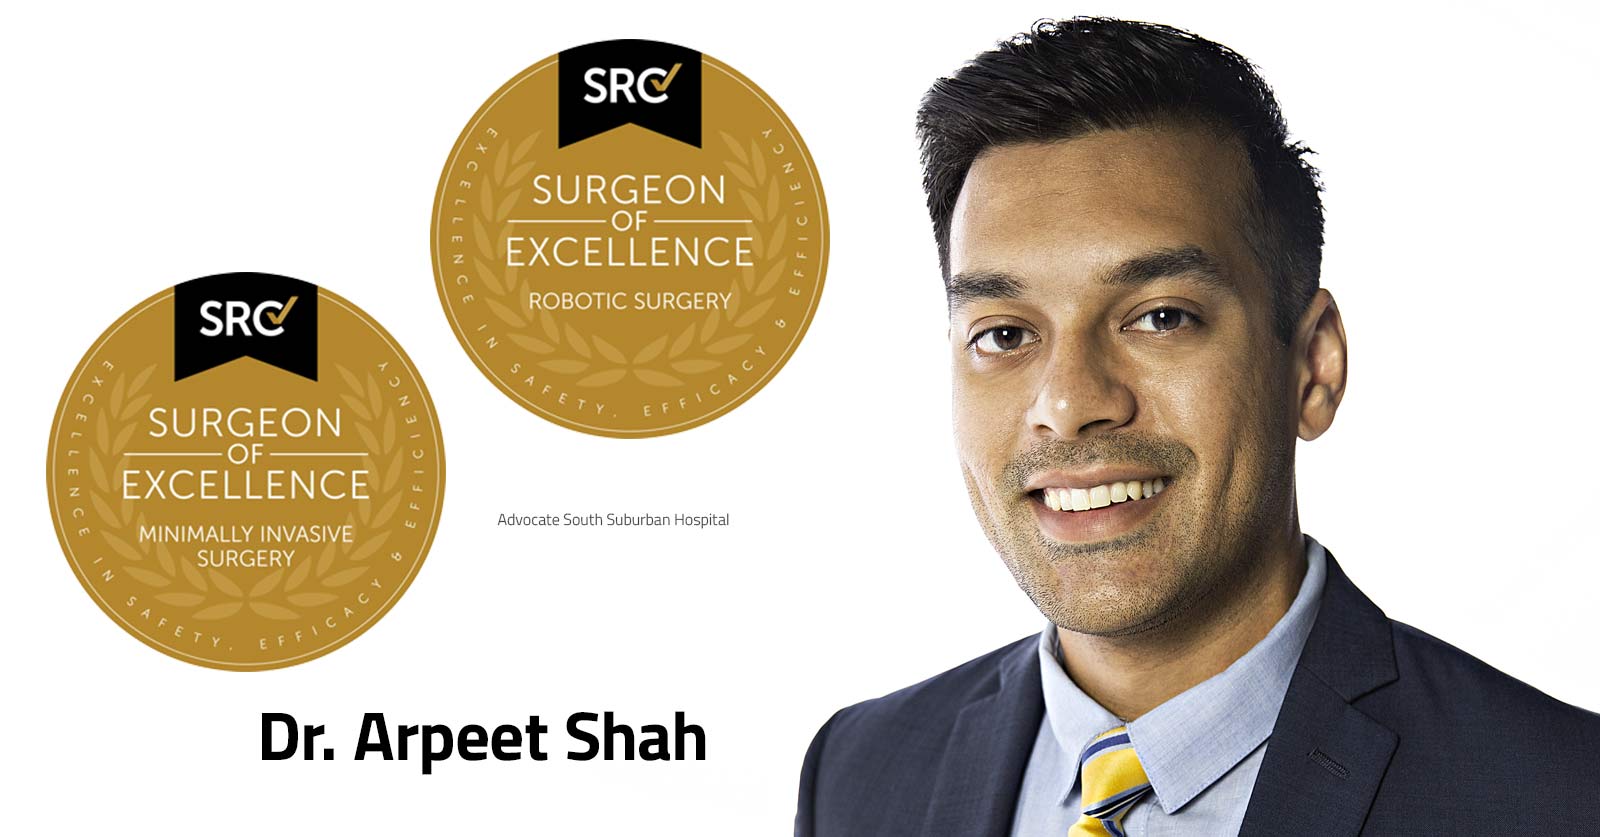 Surgeon of Excellence - Arpeet Shah, MD